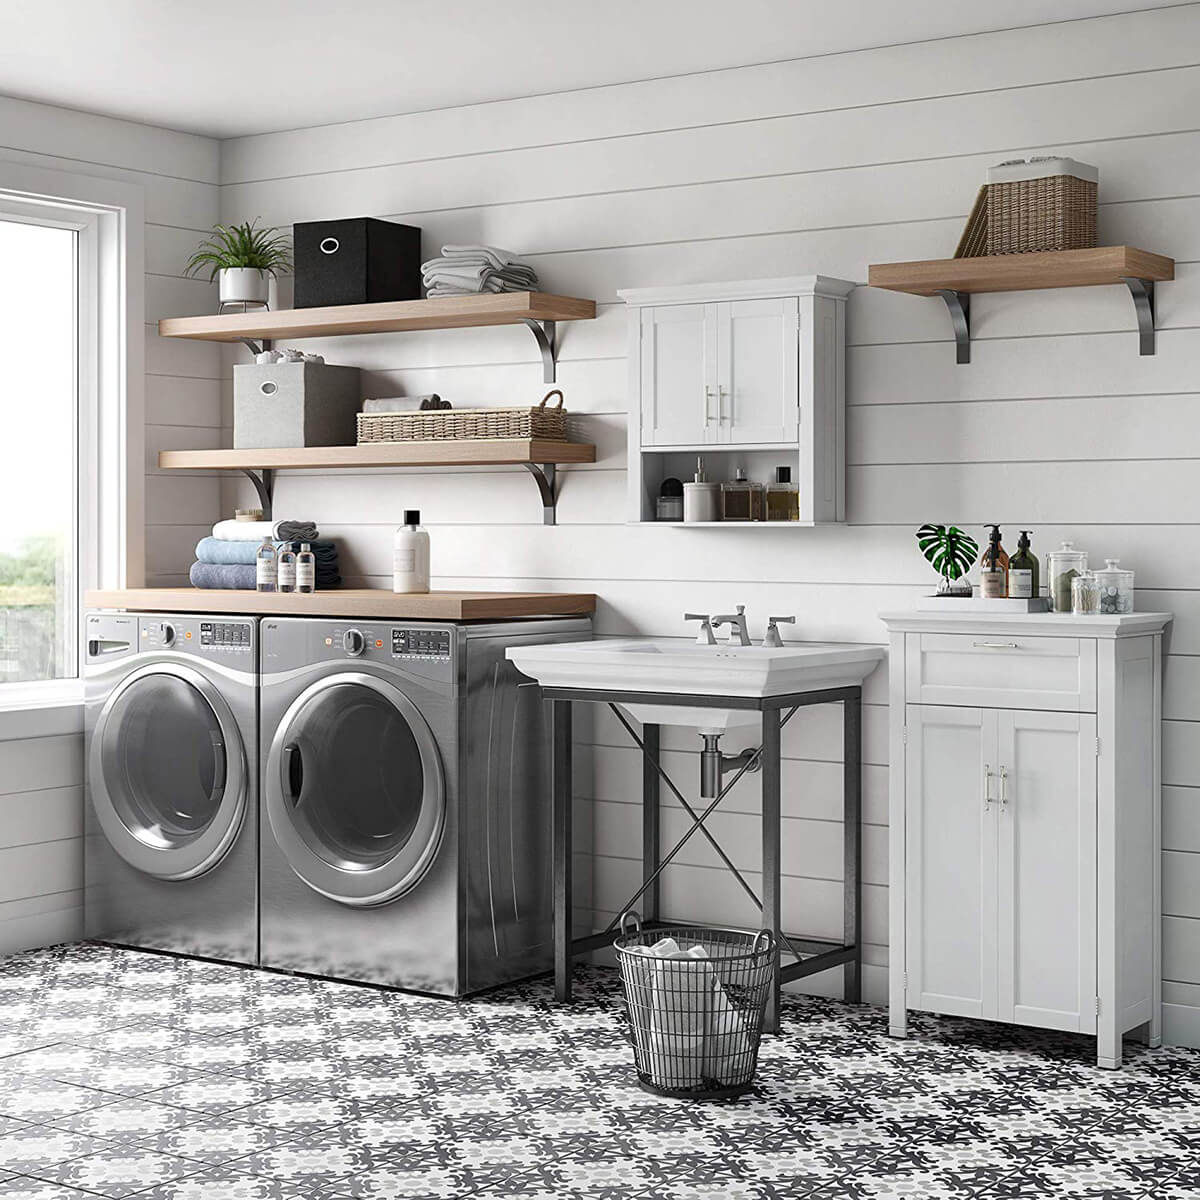 Laundry Room Cabinets And Shelves - Image to u